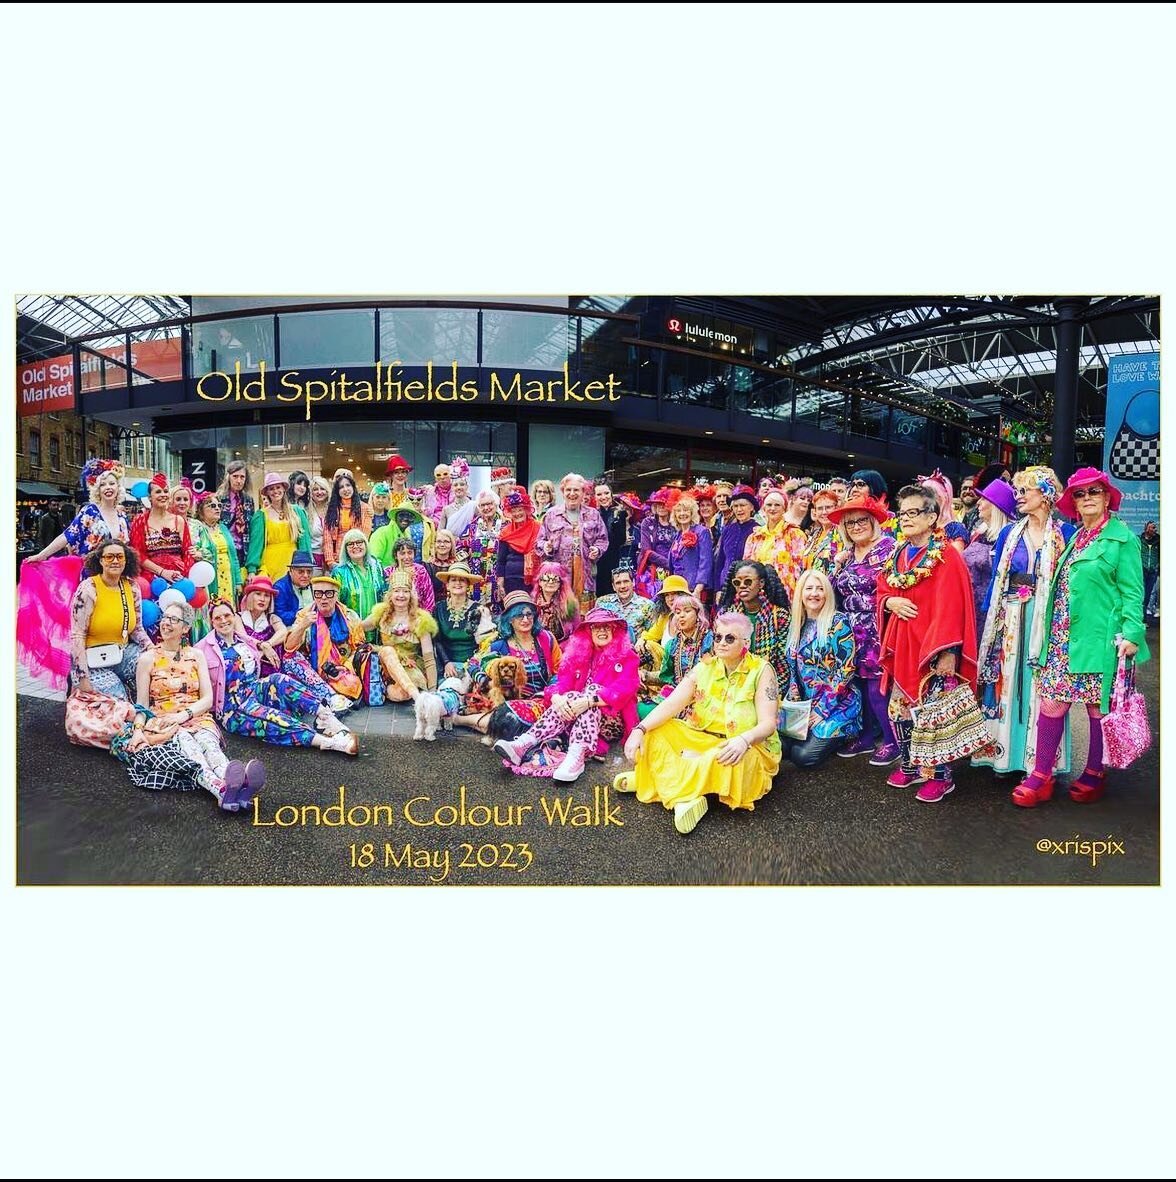 another fantastic meeting london.colour.walk  feeling so blessed to have found these wonderful people spreading happiness with colour!!💞 thank you for the photo xrispix #thelondoncolourwalk #oldspitalfieldsmarket #lovinglife #pinkhair CAN YOU SPOT M